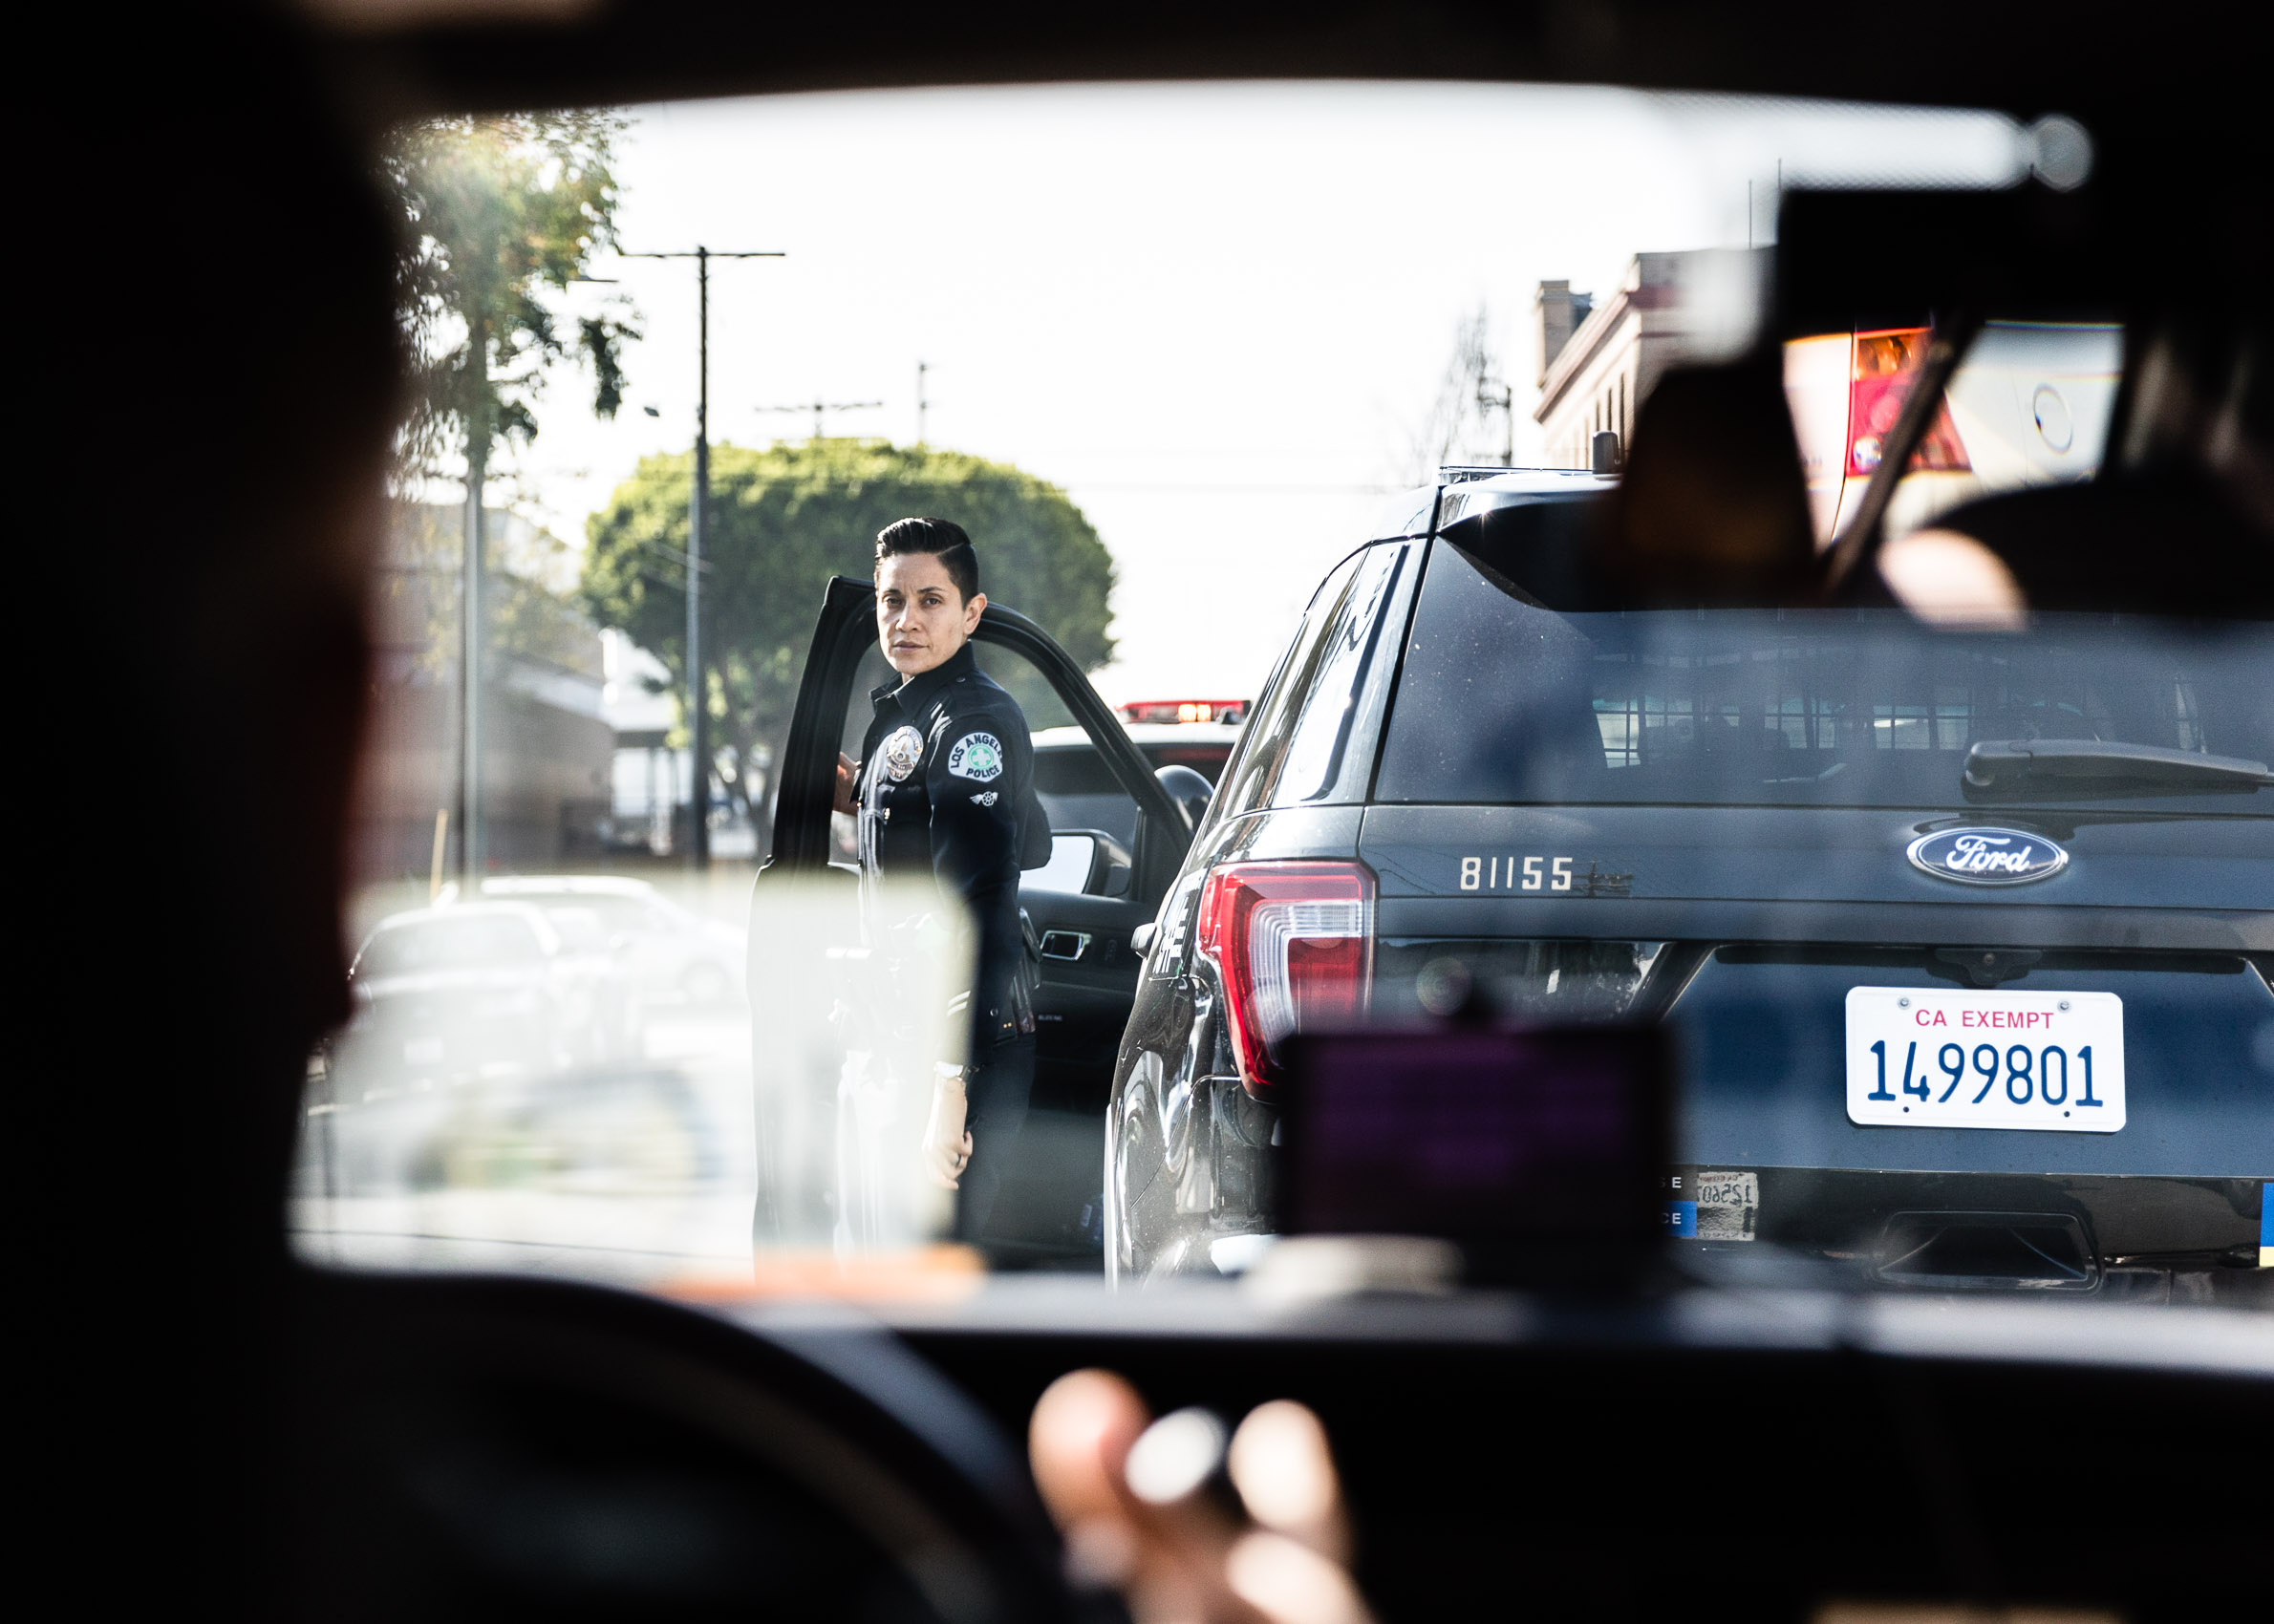 Christina Reveles, instructor, LAPD | Los Angeles | Los Angeles | Editorial and Commercial Photographer Patrick Strattner